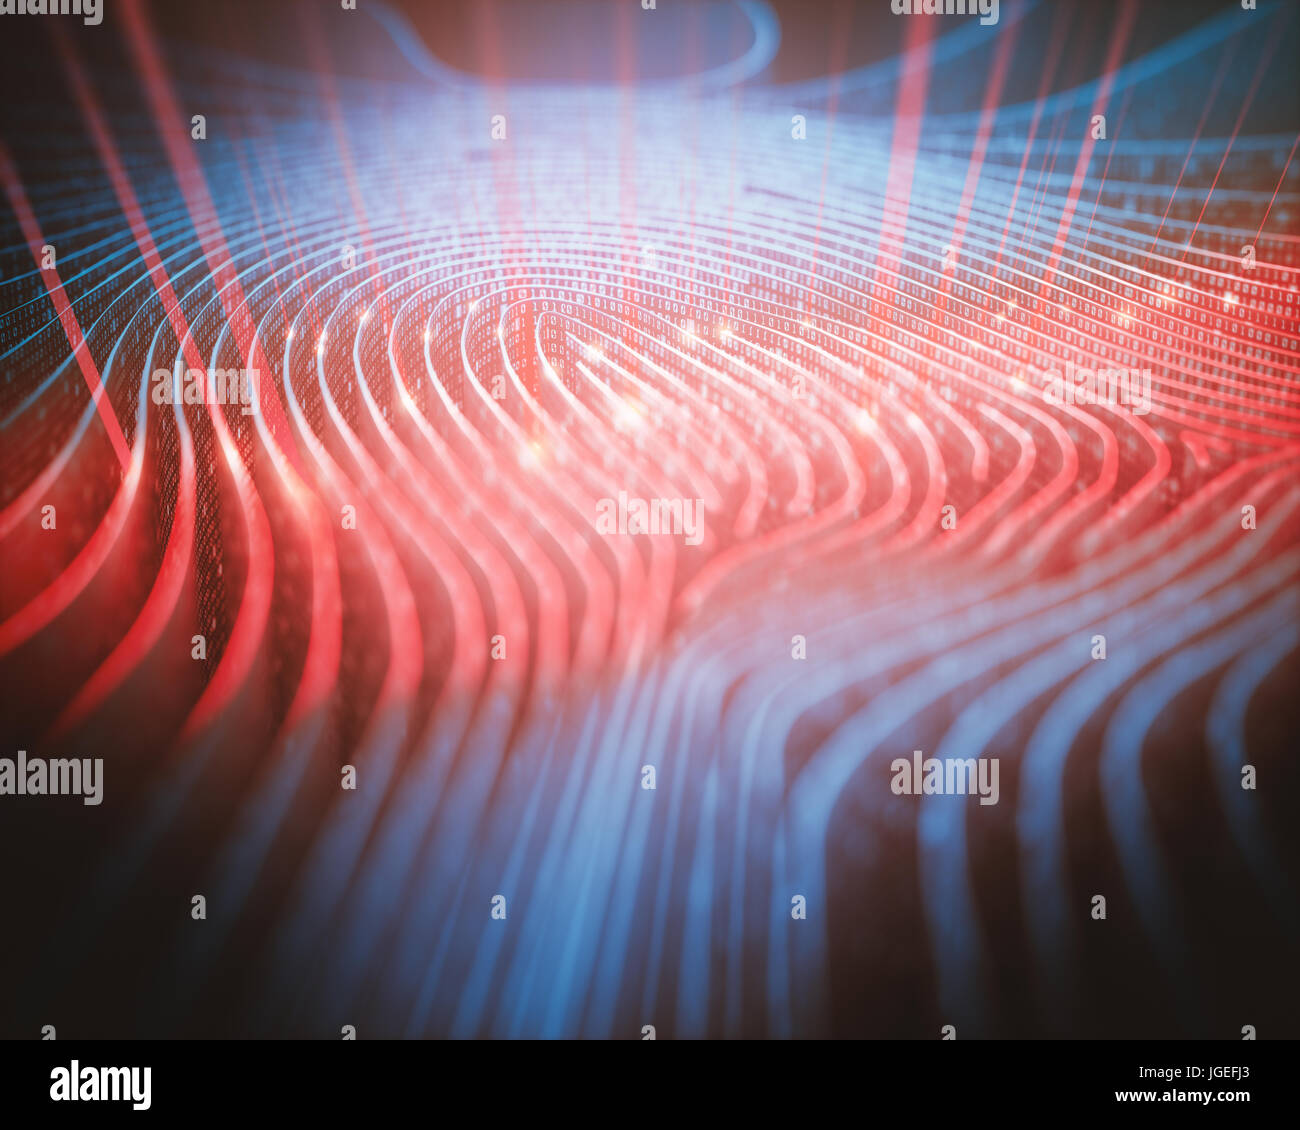 3D illustration. Fingerprint in labyrinth format, with binary codes being read by red scanner. Stock Photo